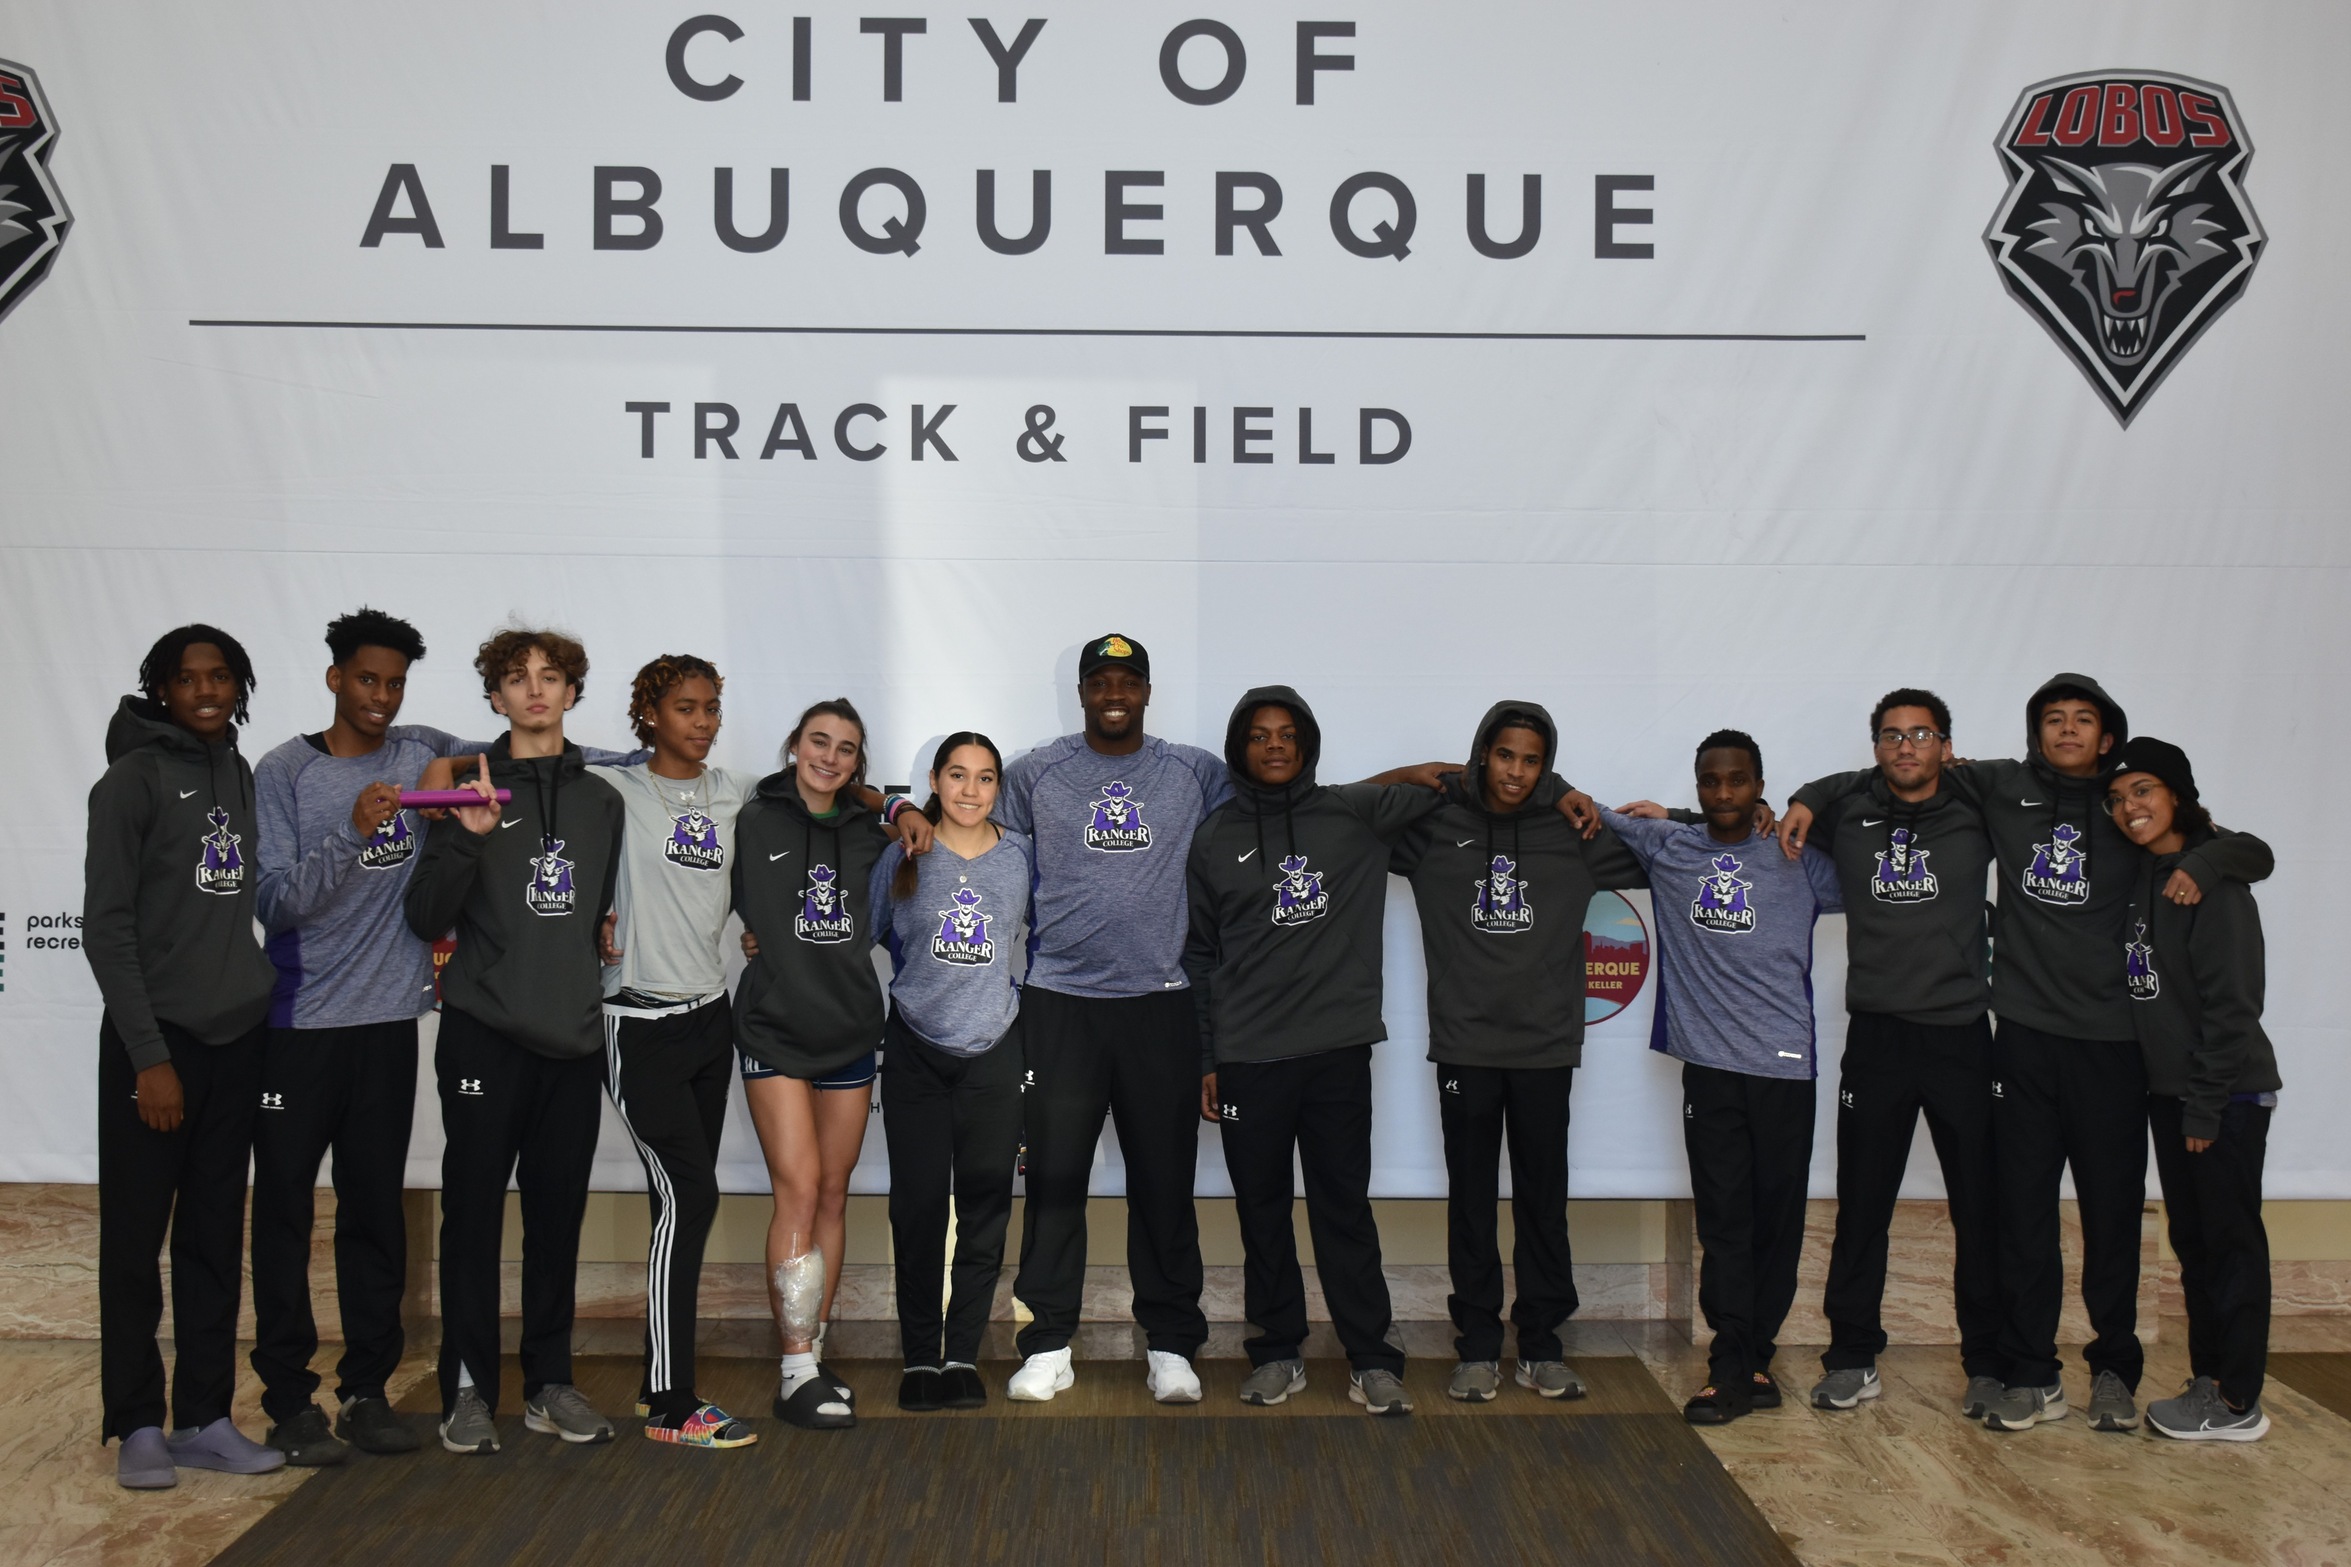 Great results are brought back by Coach DT Green and his track athletes from the New Mexico University meet.